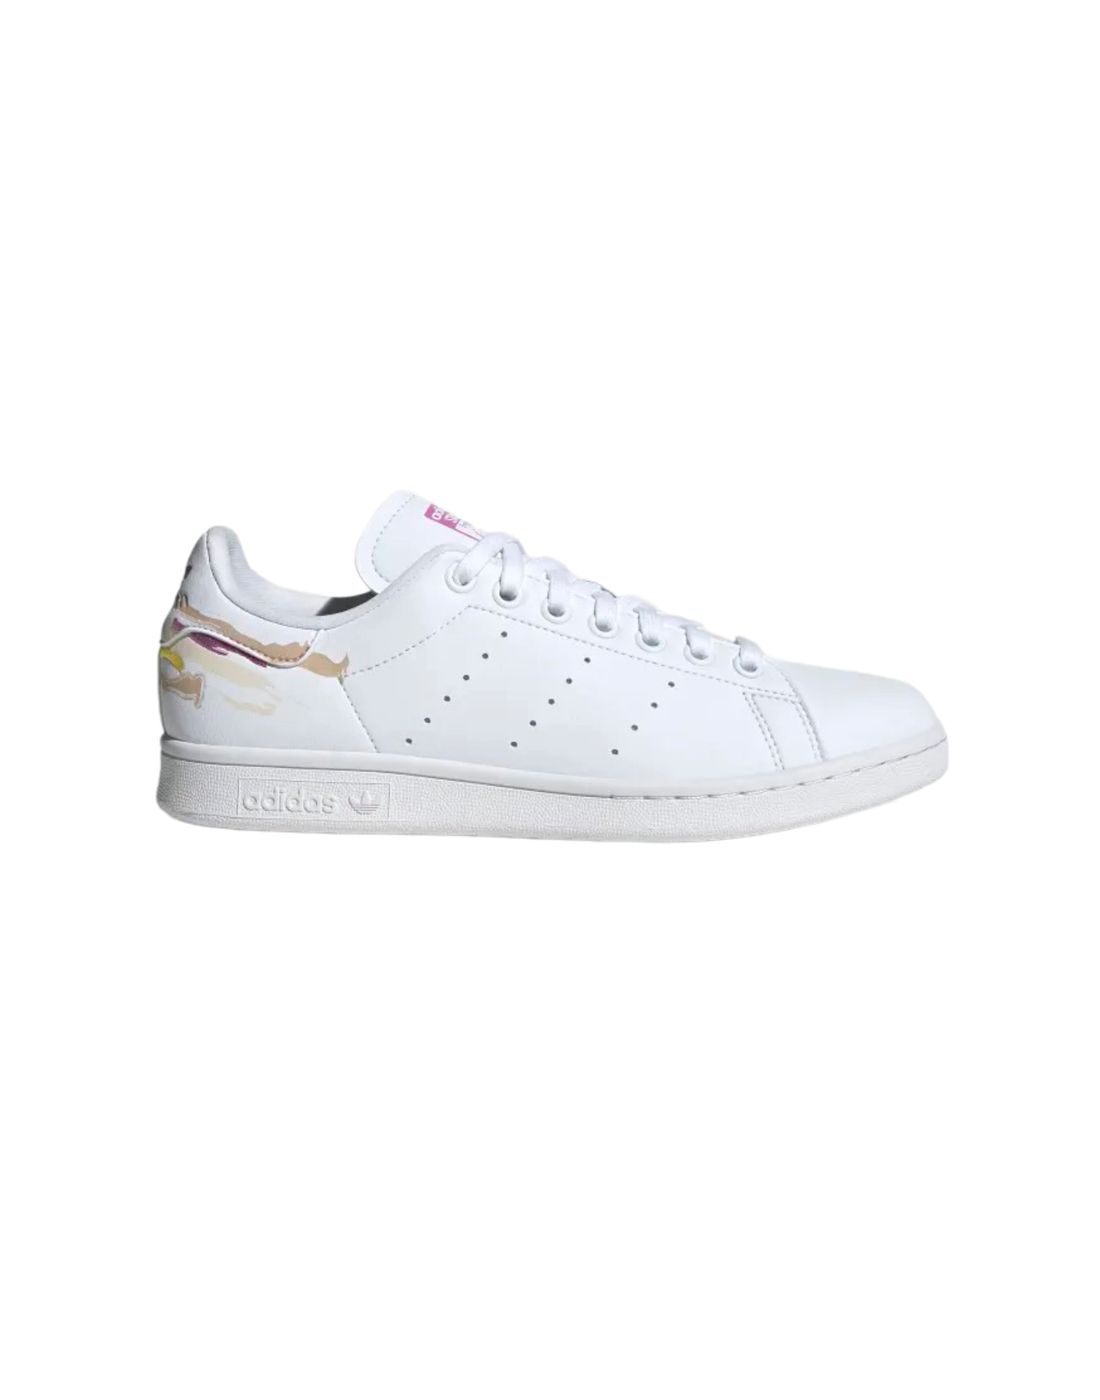 Shoes for woman GY9560 STAN SMITH TM W ADIDAS ORIGINALS